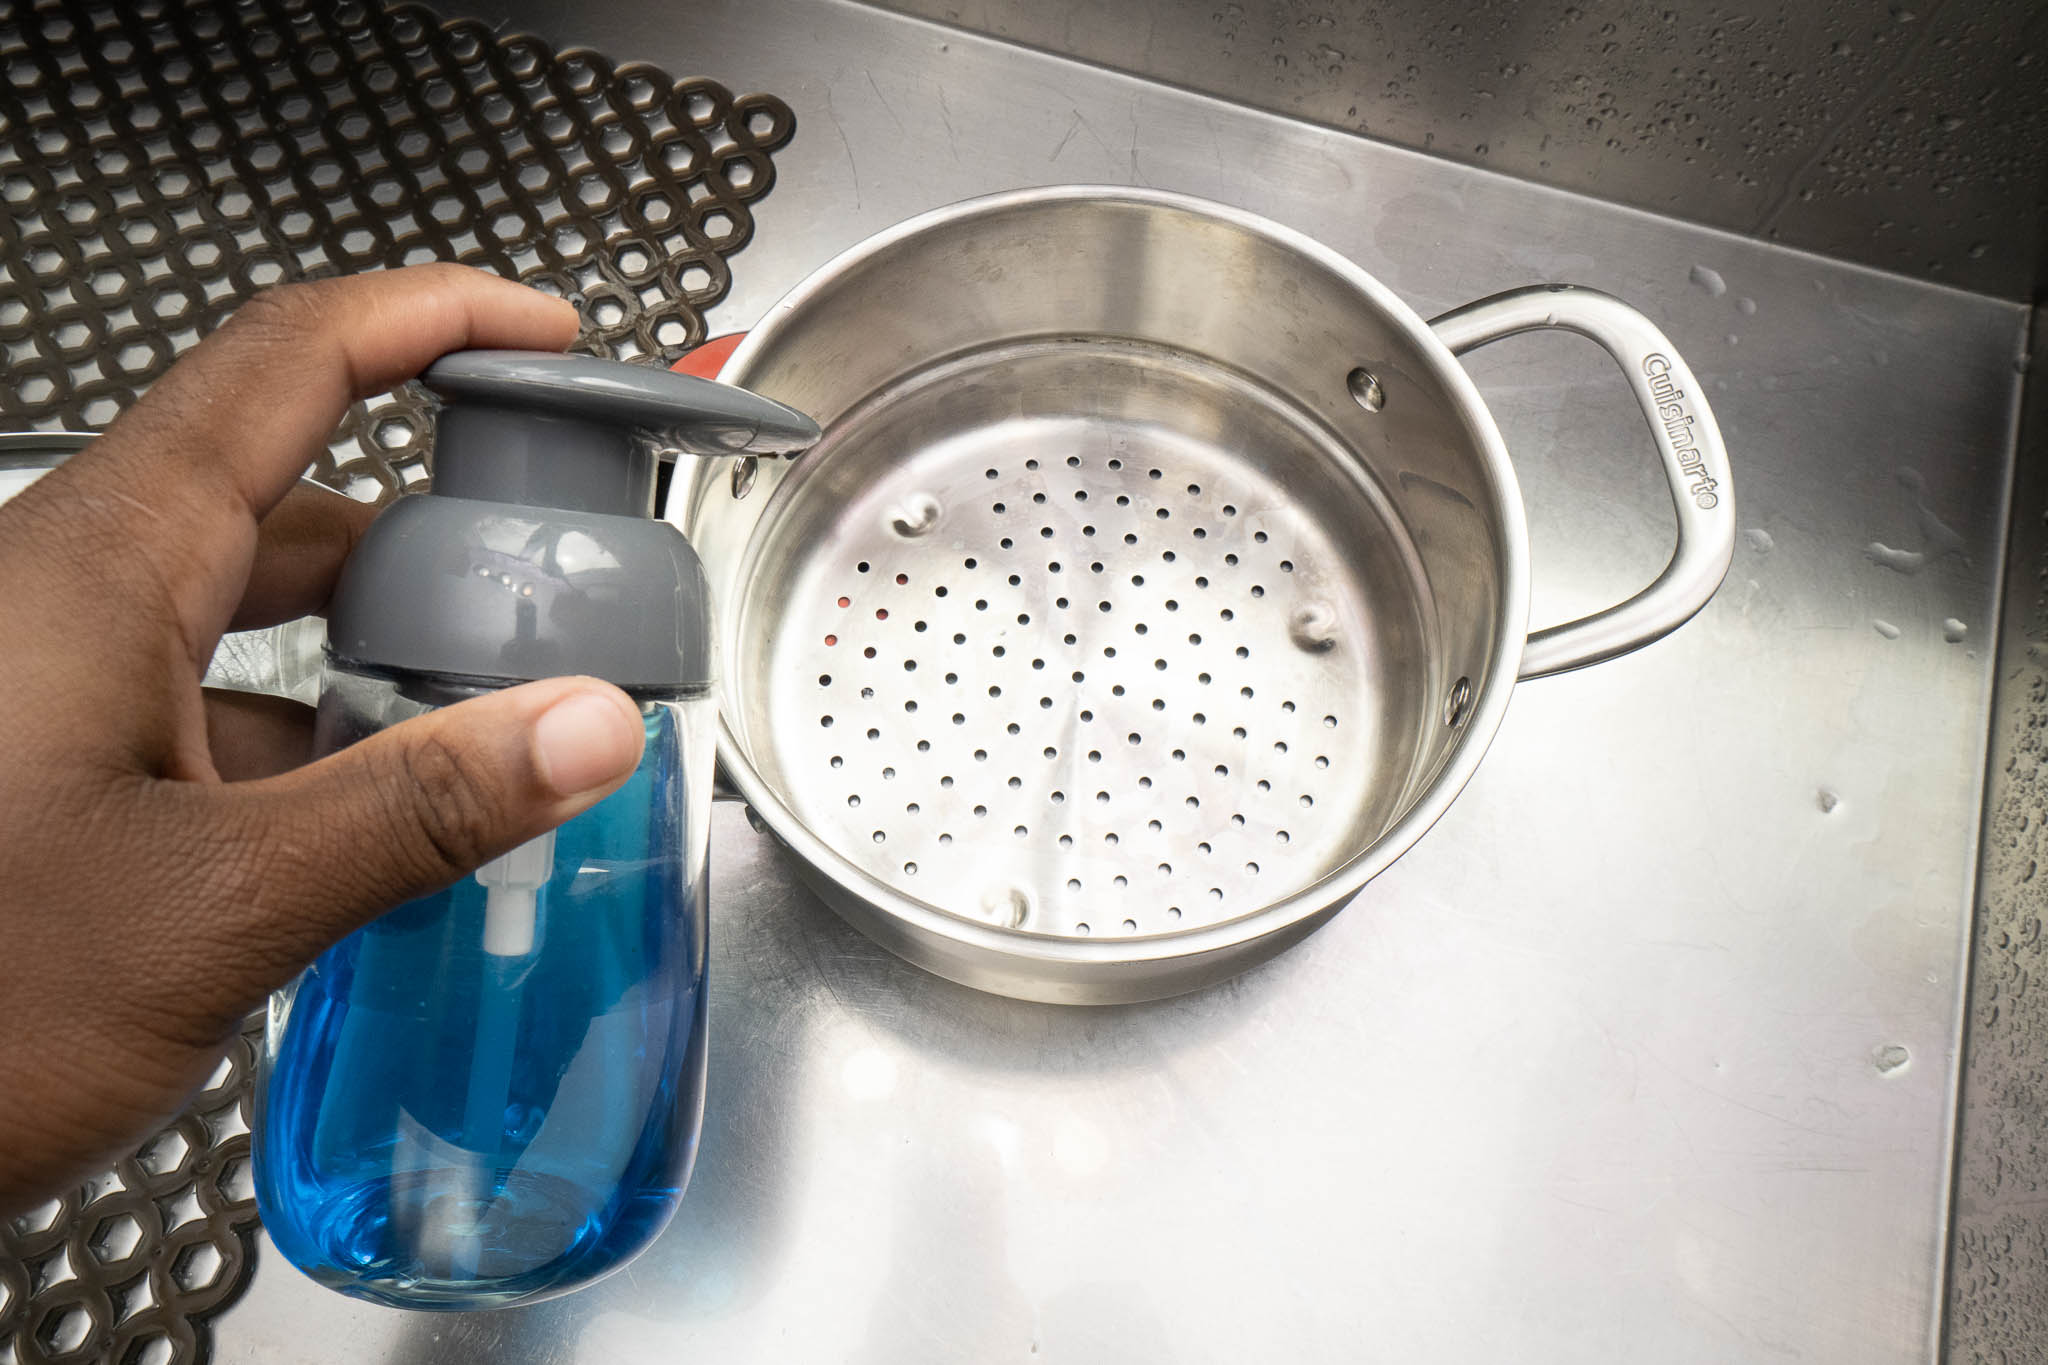 washing stainless steel pan with dawn dish soap